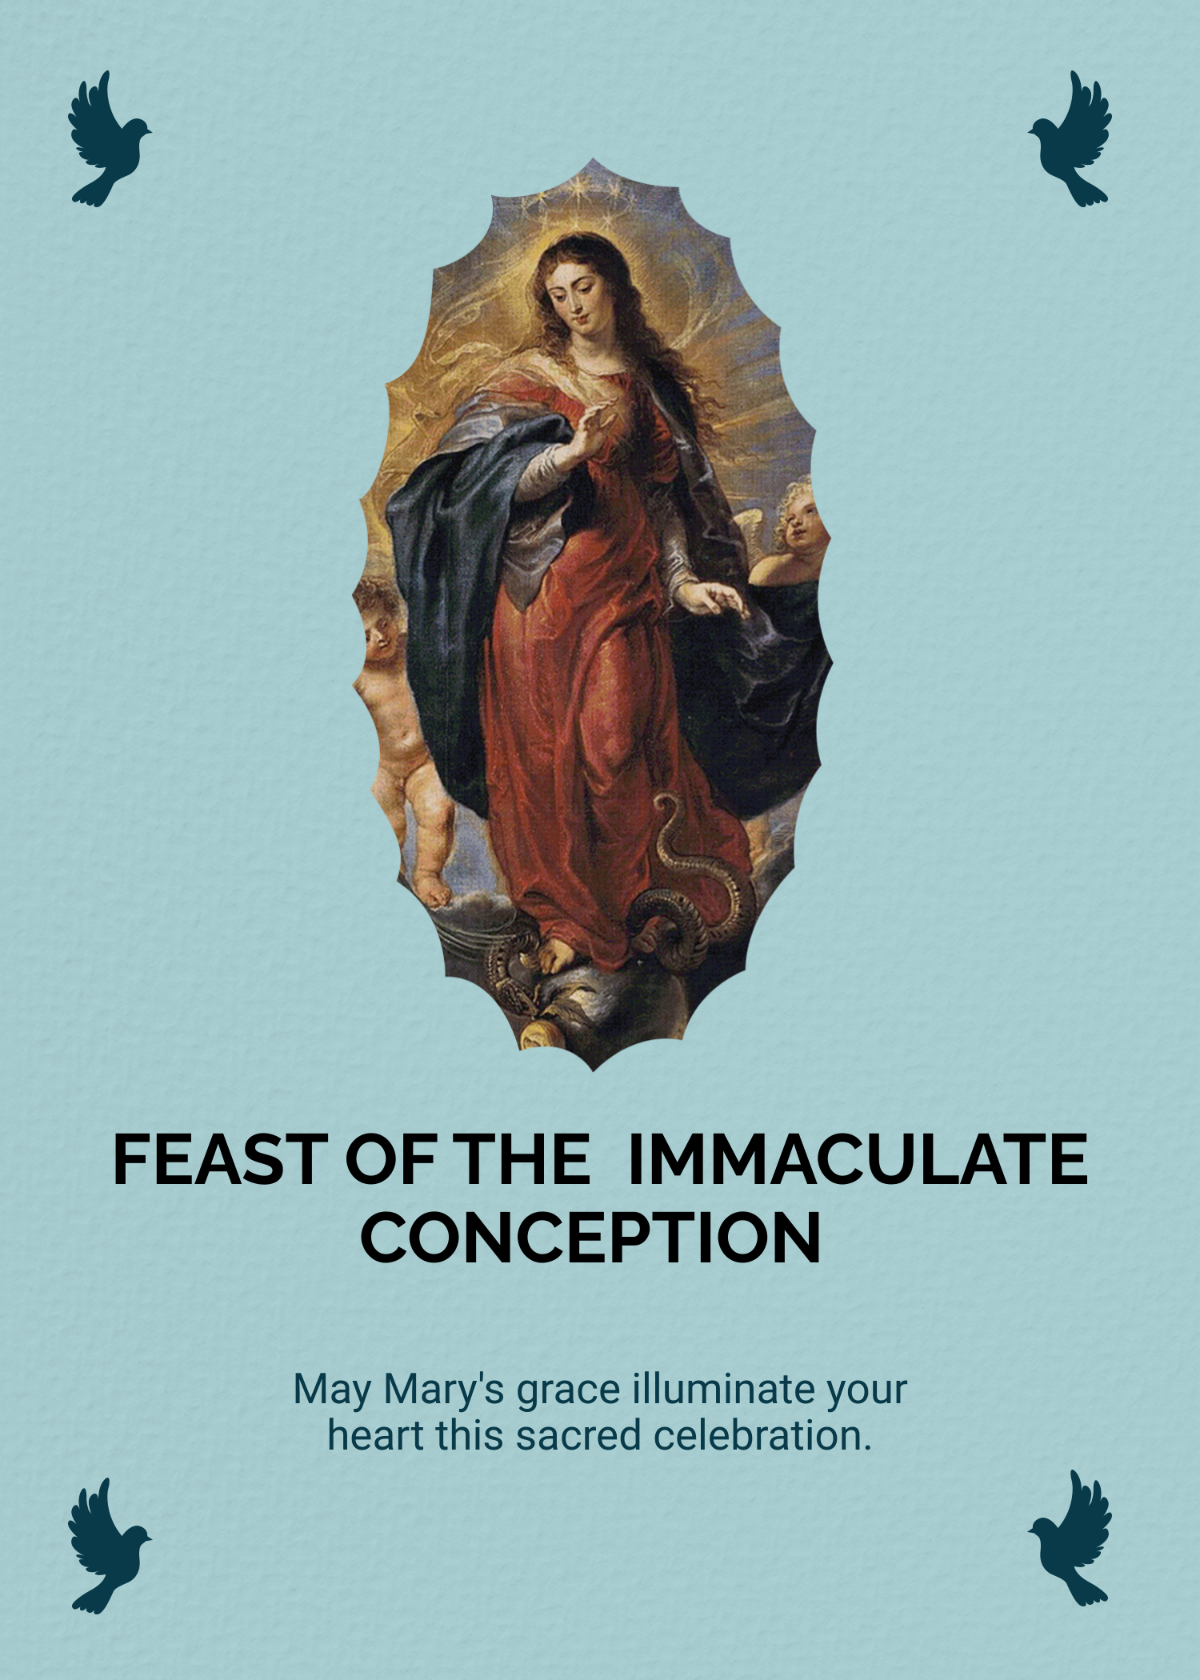 Feast of the Immaculate Conception Day Message